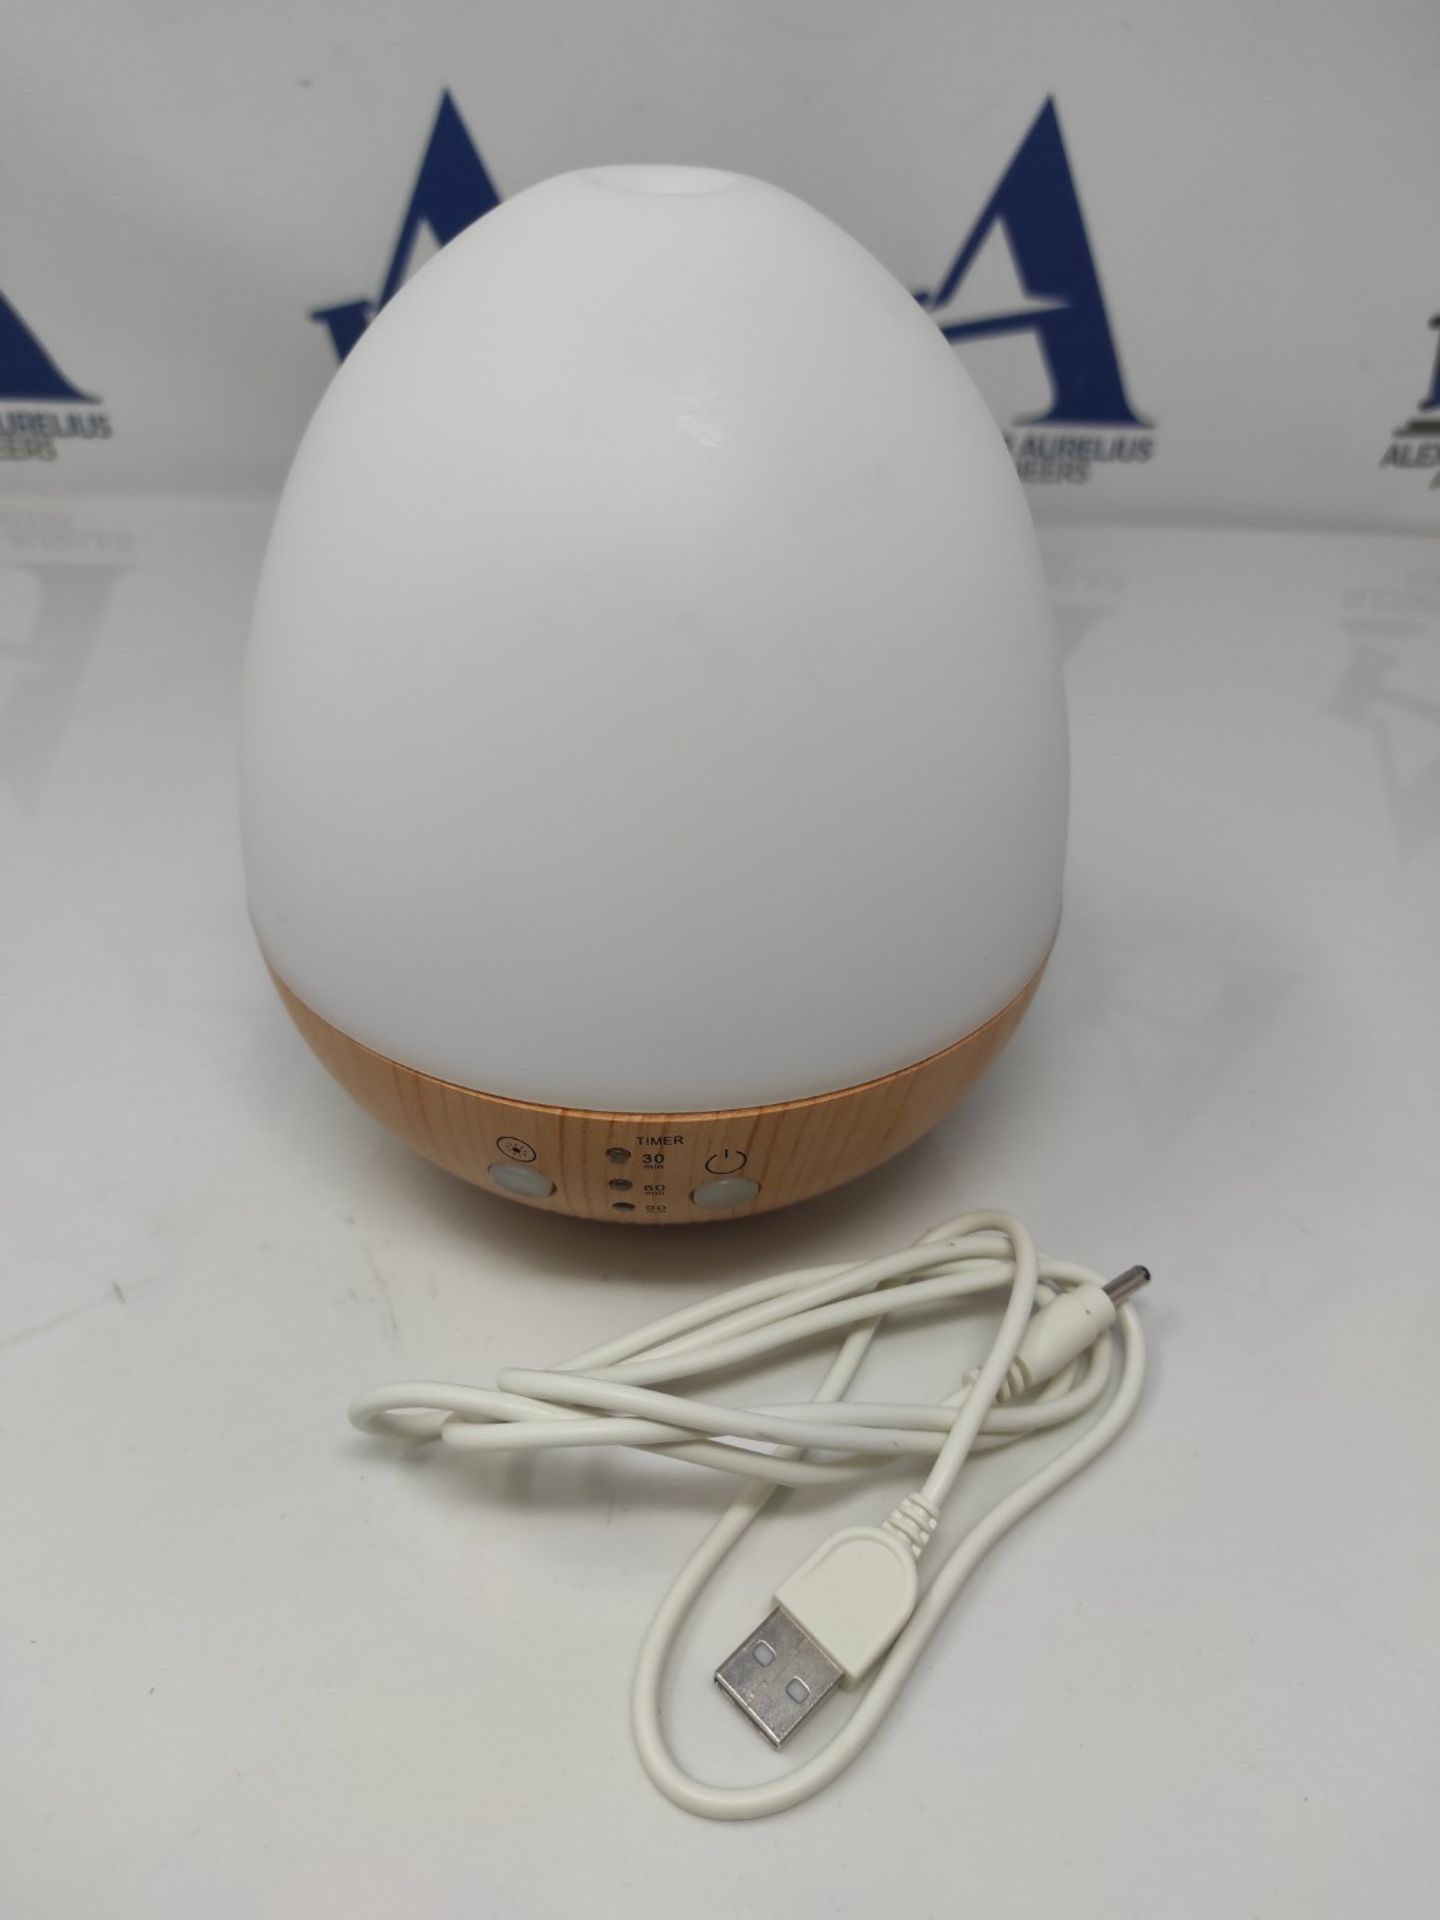 BEPER P205DIF001 Essential Oils Diffuser, Aroma Diffuser, 5 W, Ultrasonic Technology, - Image 3 of 3